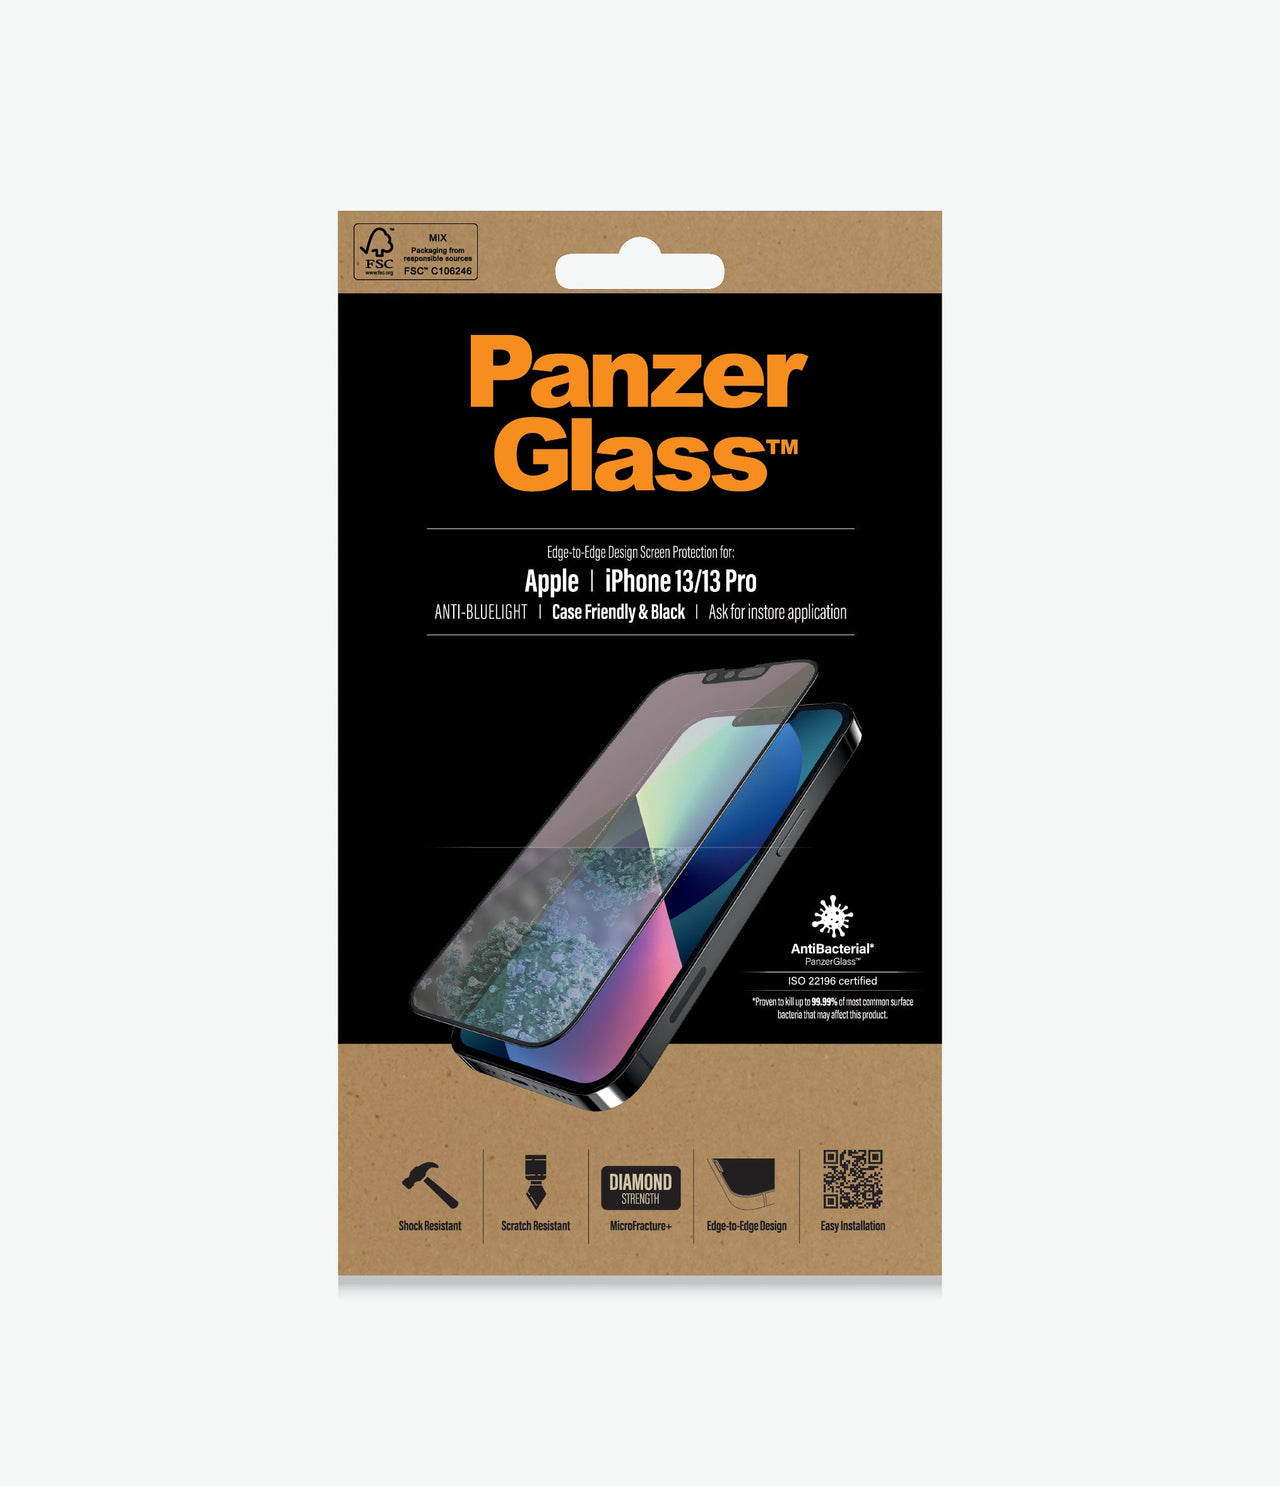 Panzer Glass Anti-bluelight Screen Protector for iPhone 13/13 Pro - Black